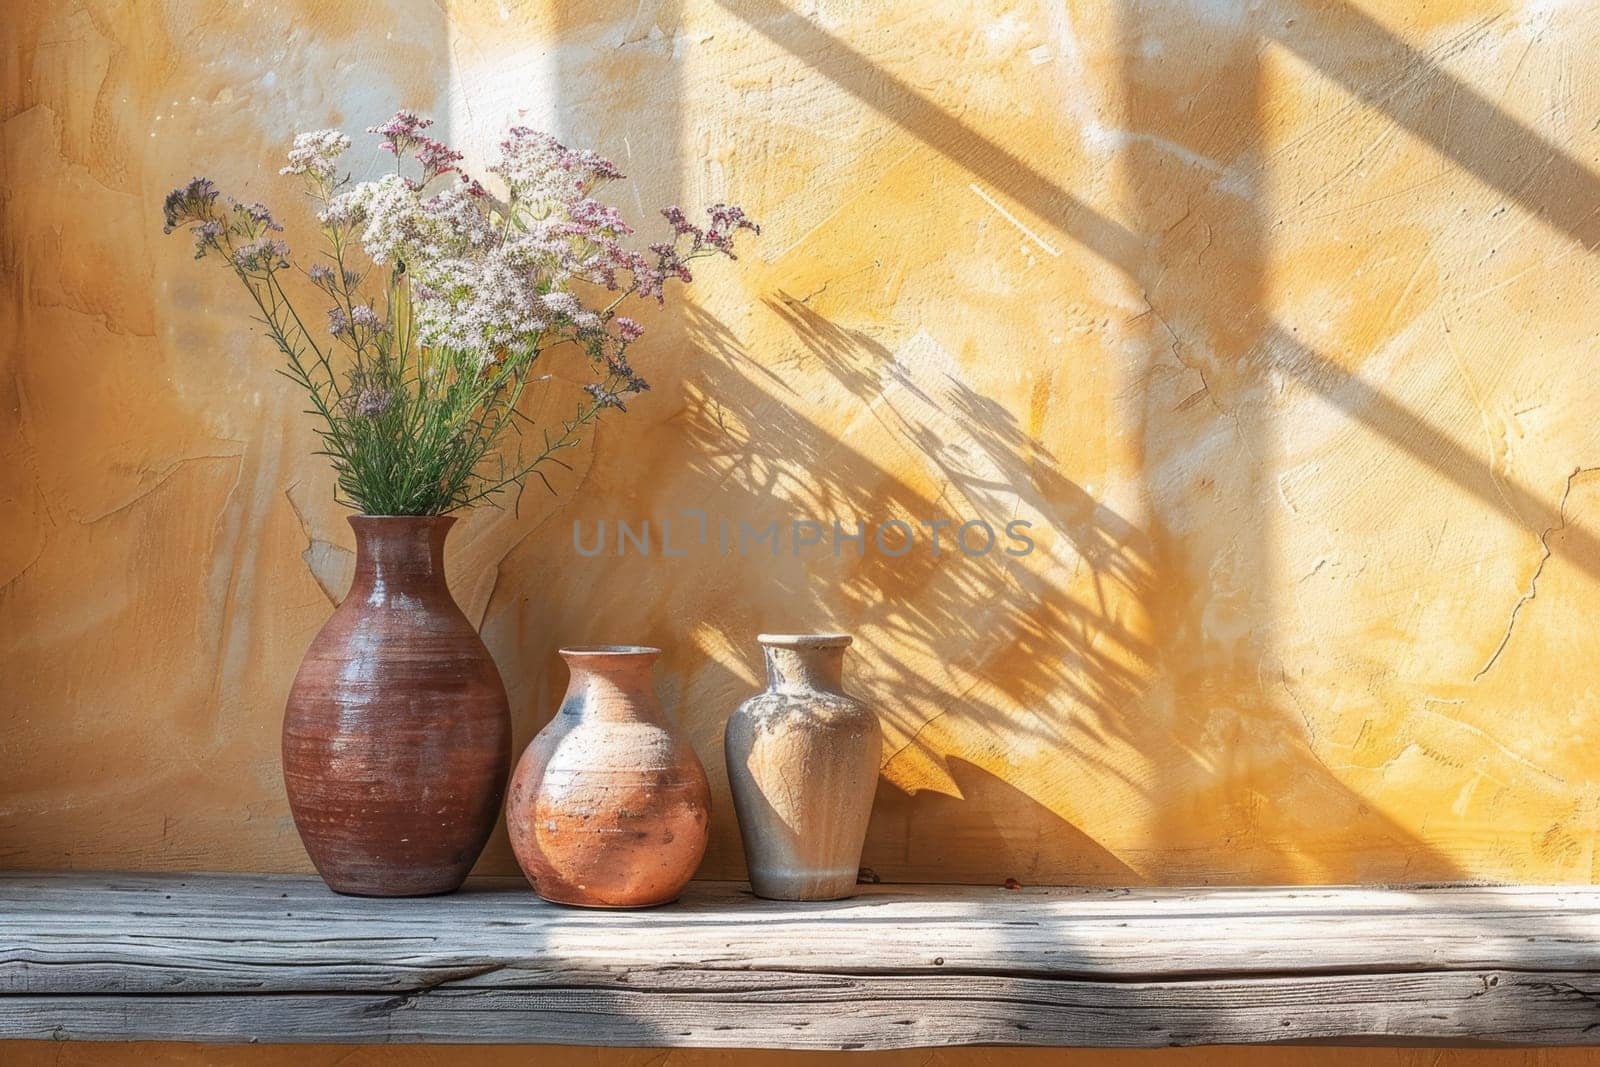 Decorative pitchers stand against a gray wall on a sunny day.